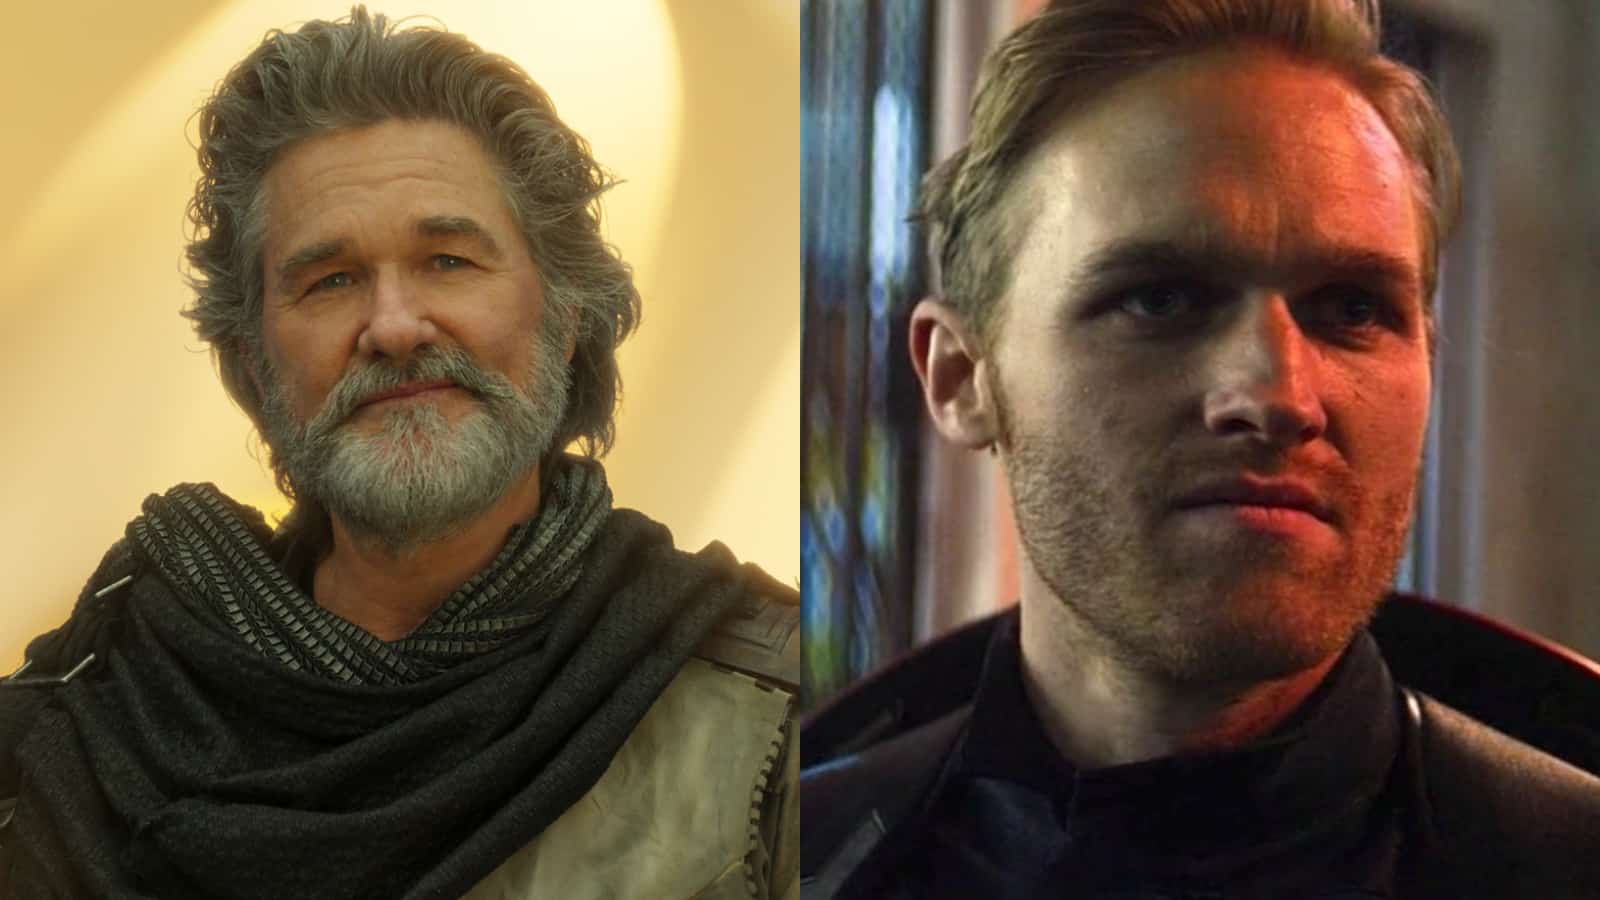 Kurt Russell as Ego and Wyatt Russell as US Agent in the MCU